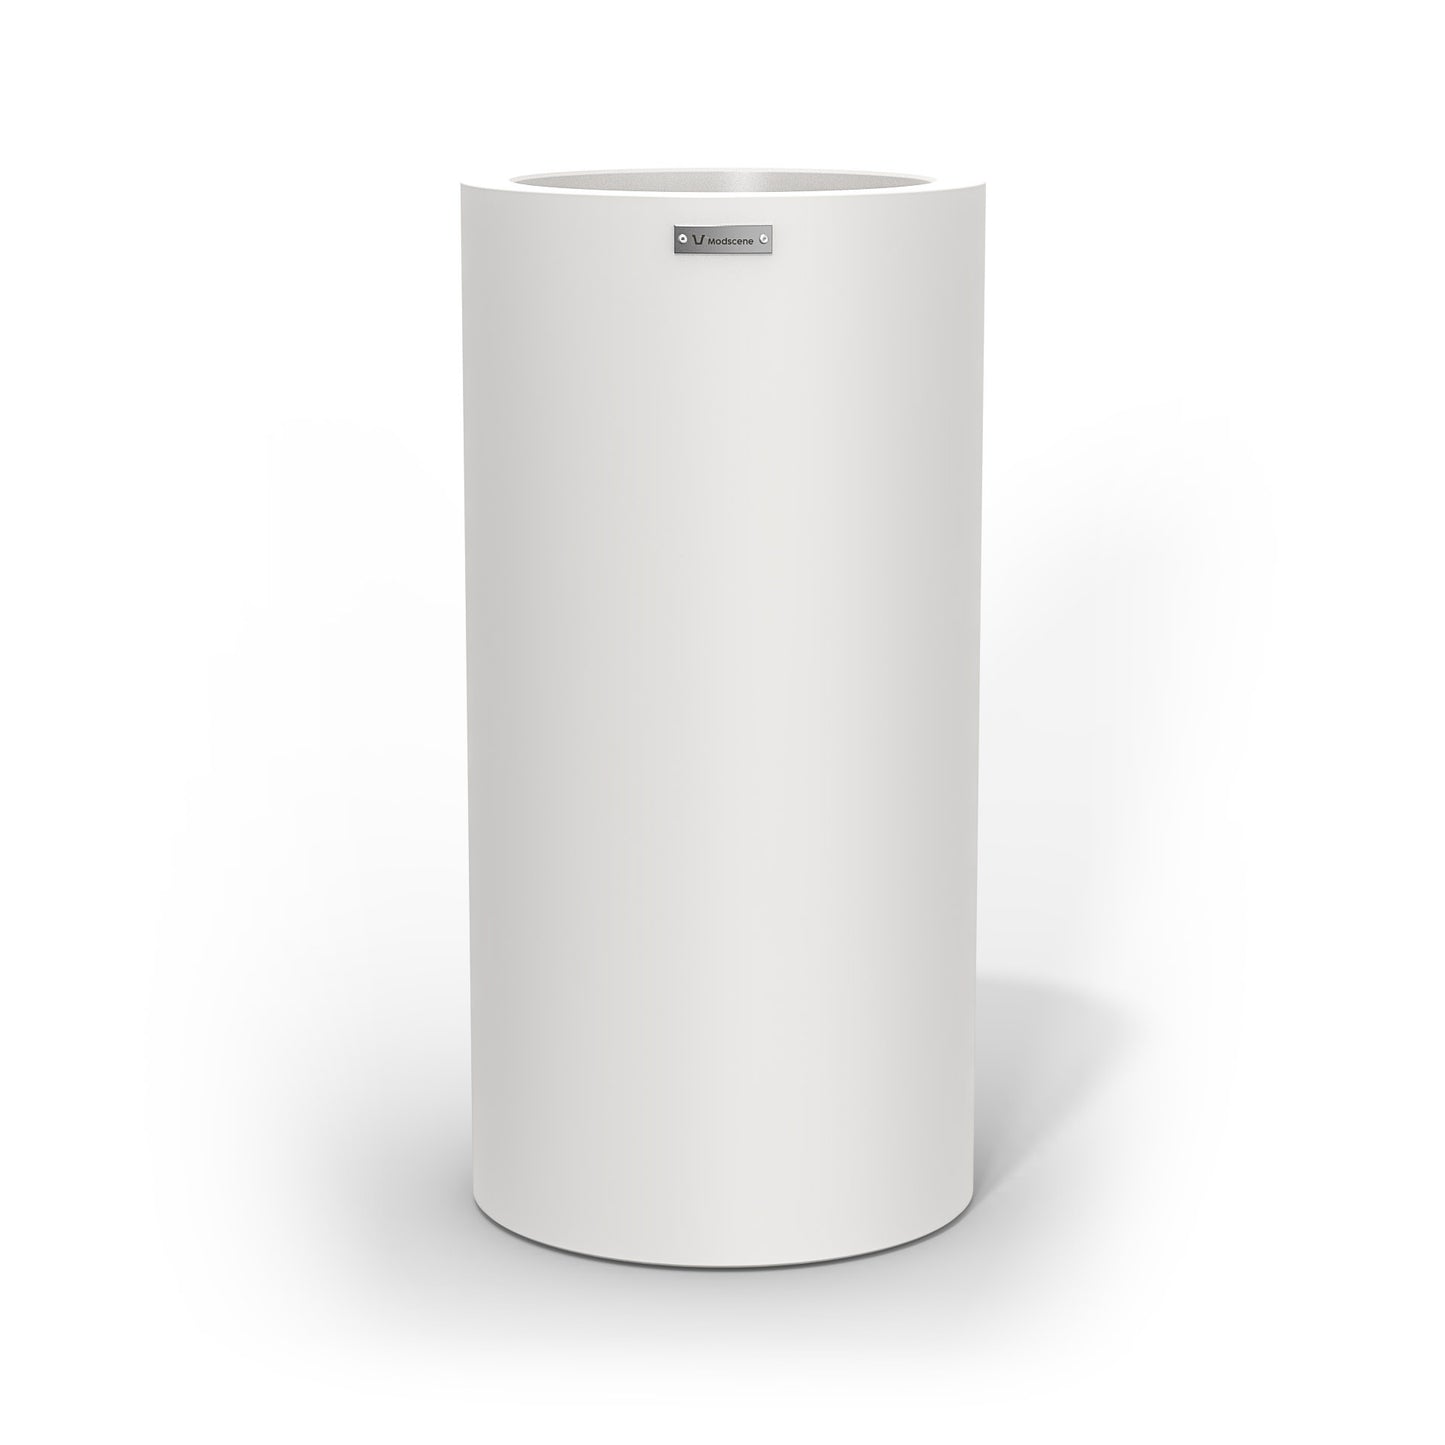 A tall cigar cylinder planter pot in white made by Modscene.